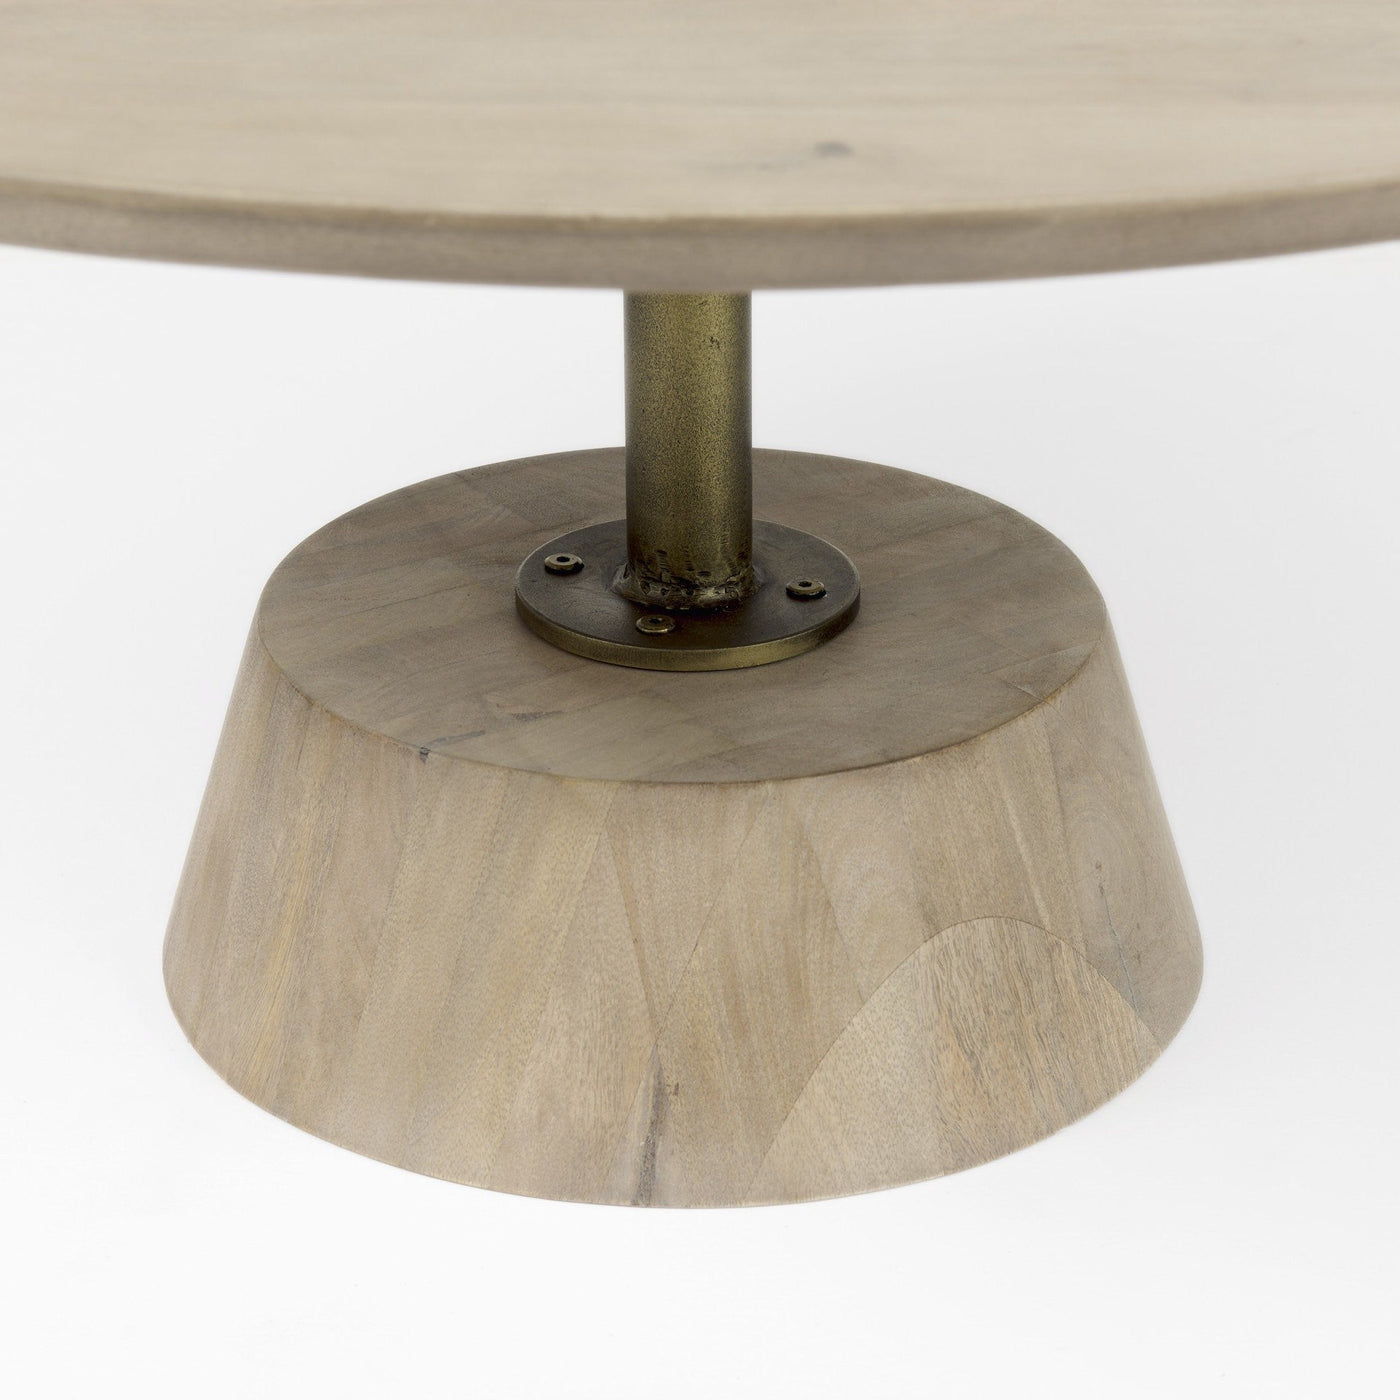 Light Brown Wooden Pedestal Coffee Table - Coffee Tables